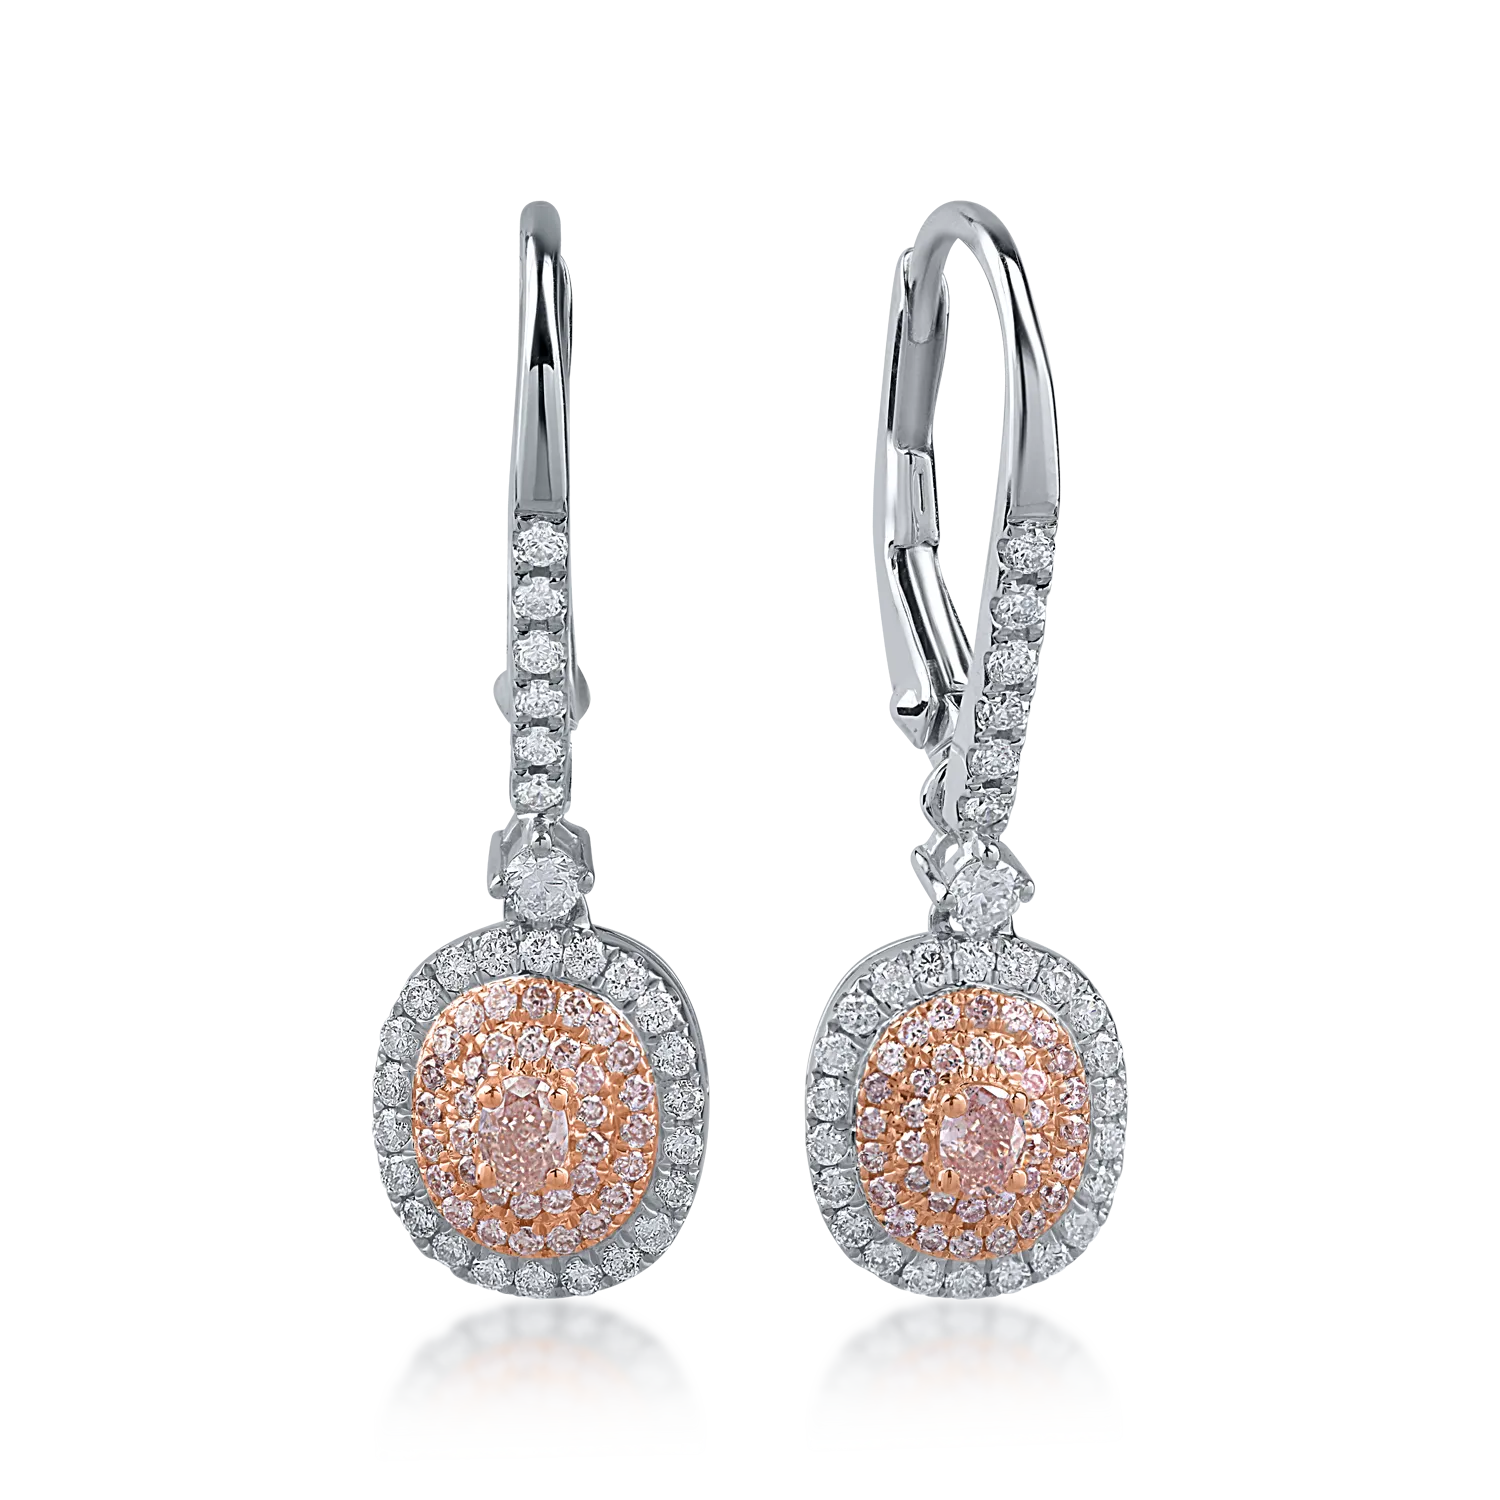 White-rose gold earrings with 0.43ct clear diamonds and 0.32ct rose diamonds